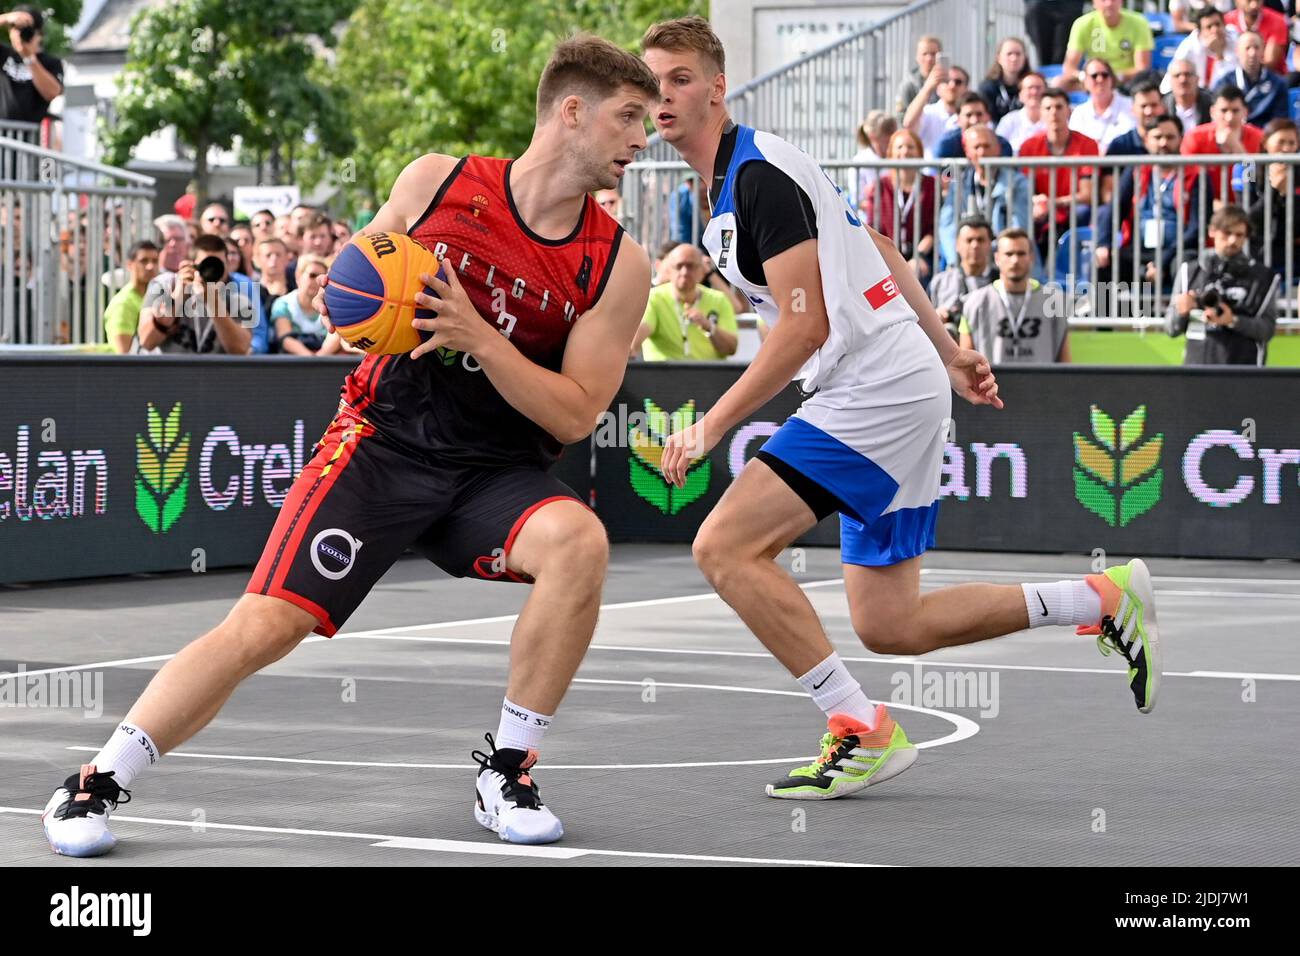 Antwerp. Belgium, 21 June 2022, Belgium's Bryan De Valck pictured in action  during a 3x3 basketball game between Belgium and Slovenia, in the first  game (out of four) of the Men's Qualifier